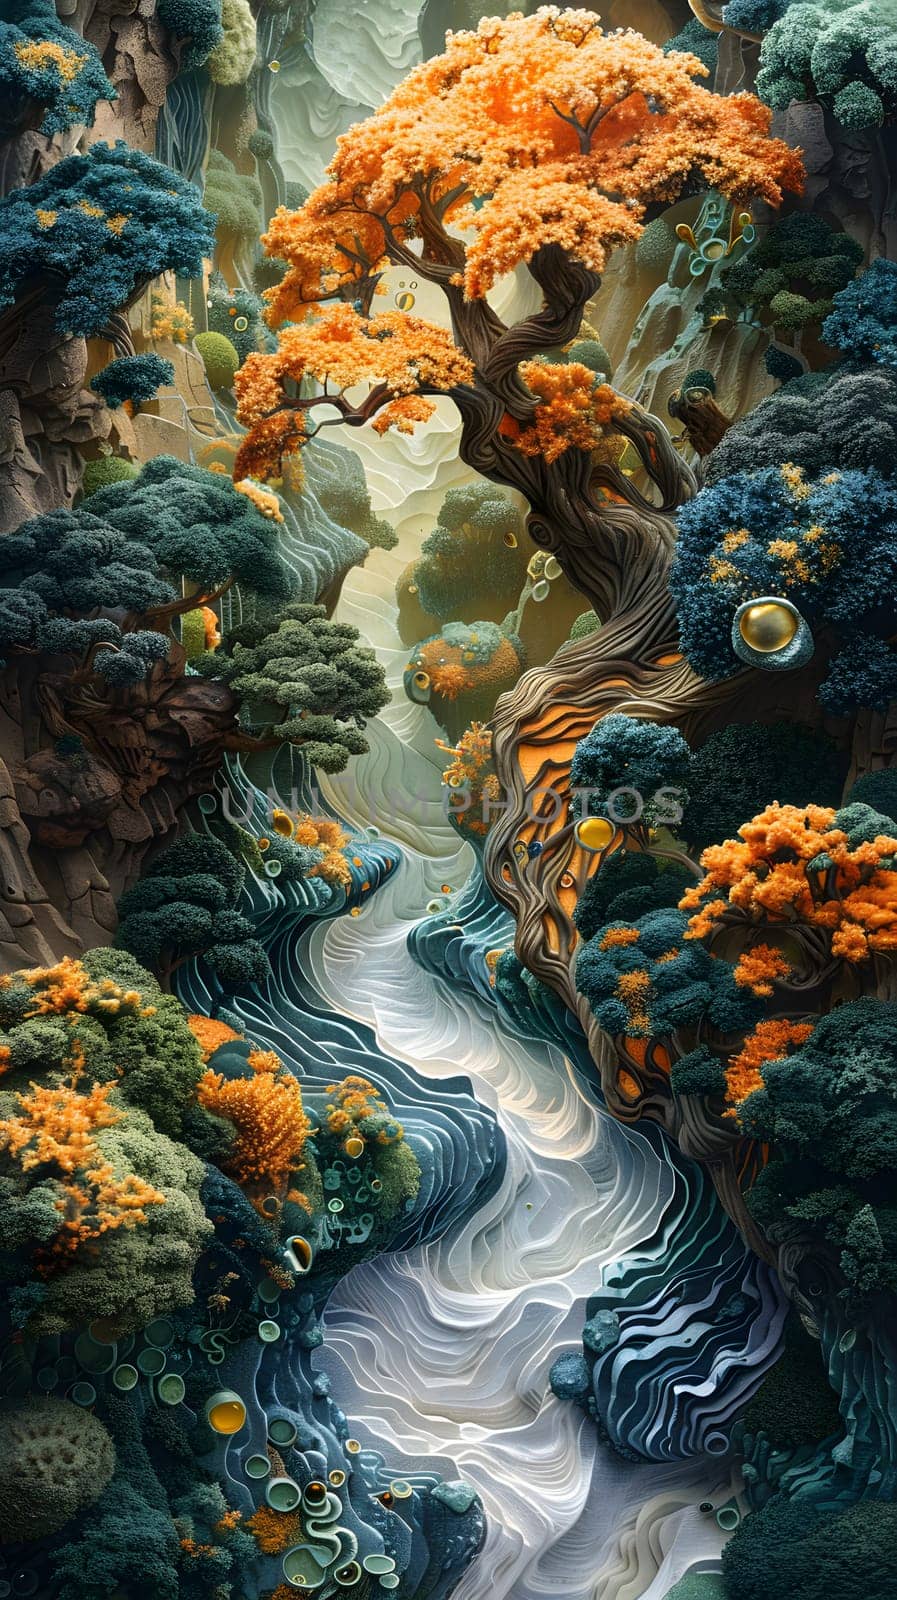 A painting depicting a river flowing through a verdant forest by Nadtochiy